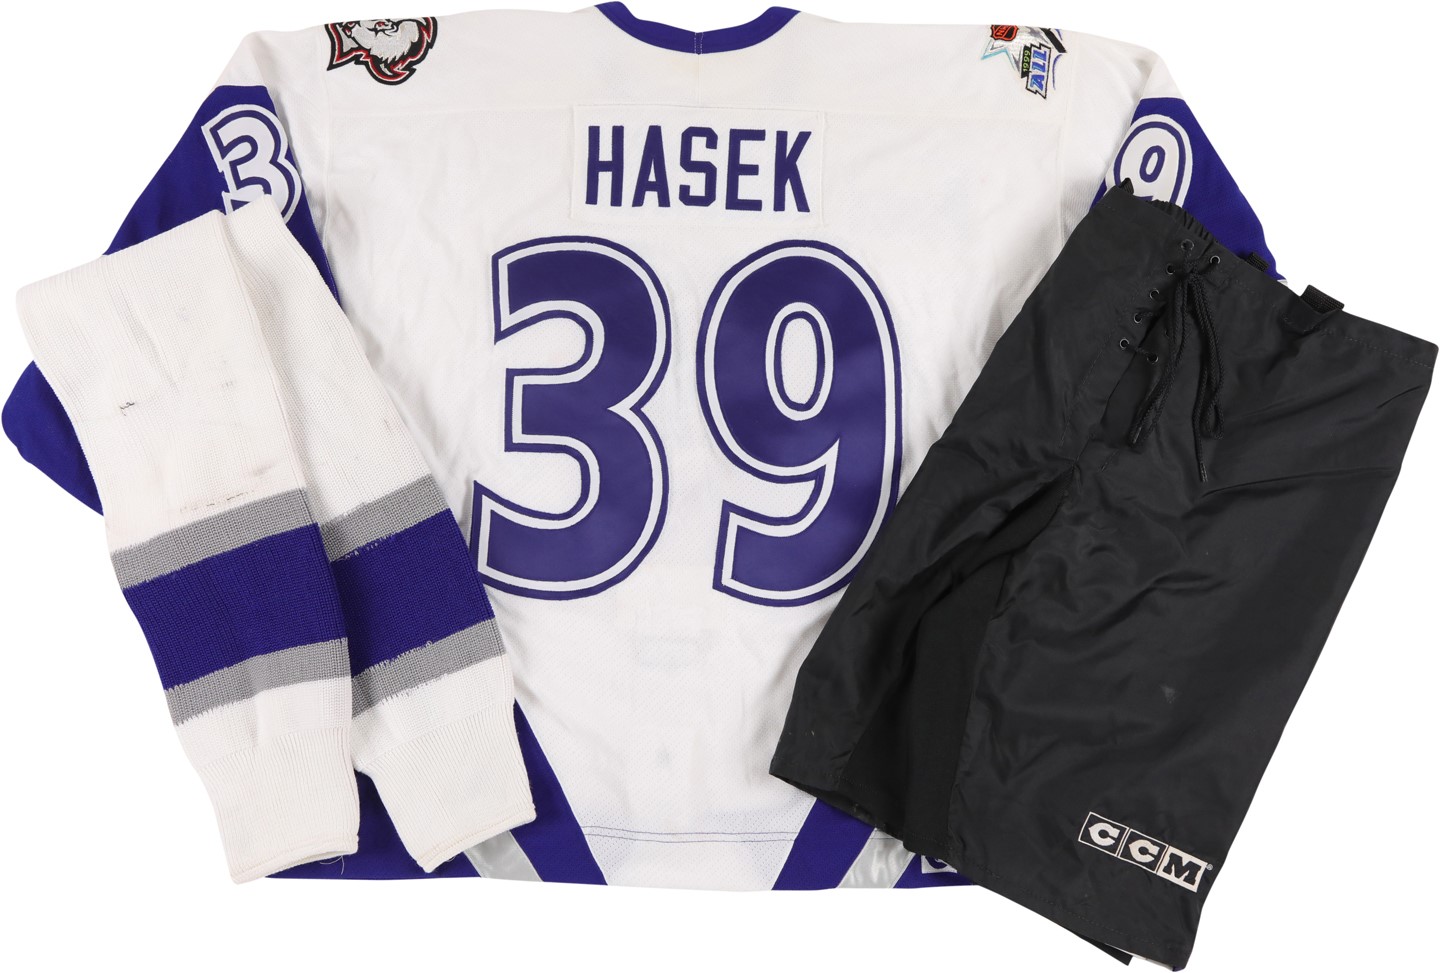 Buffalo Sabres Collection - 1999 Dominik Hasek NHL All-Star Game Worn Jersey, Pants and Socks